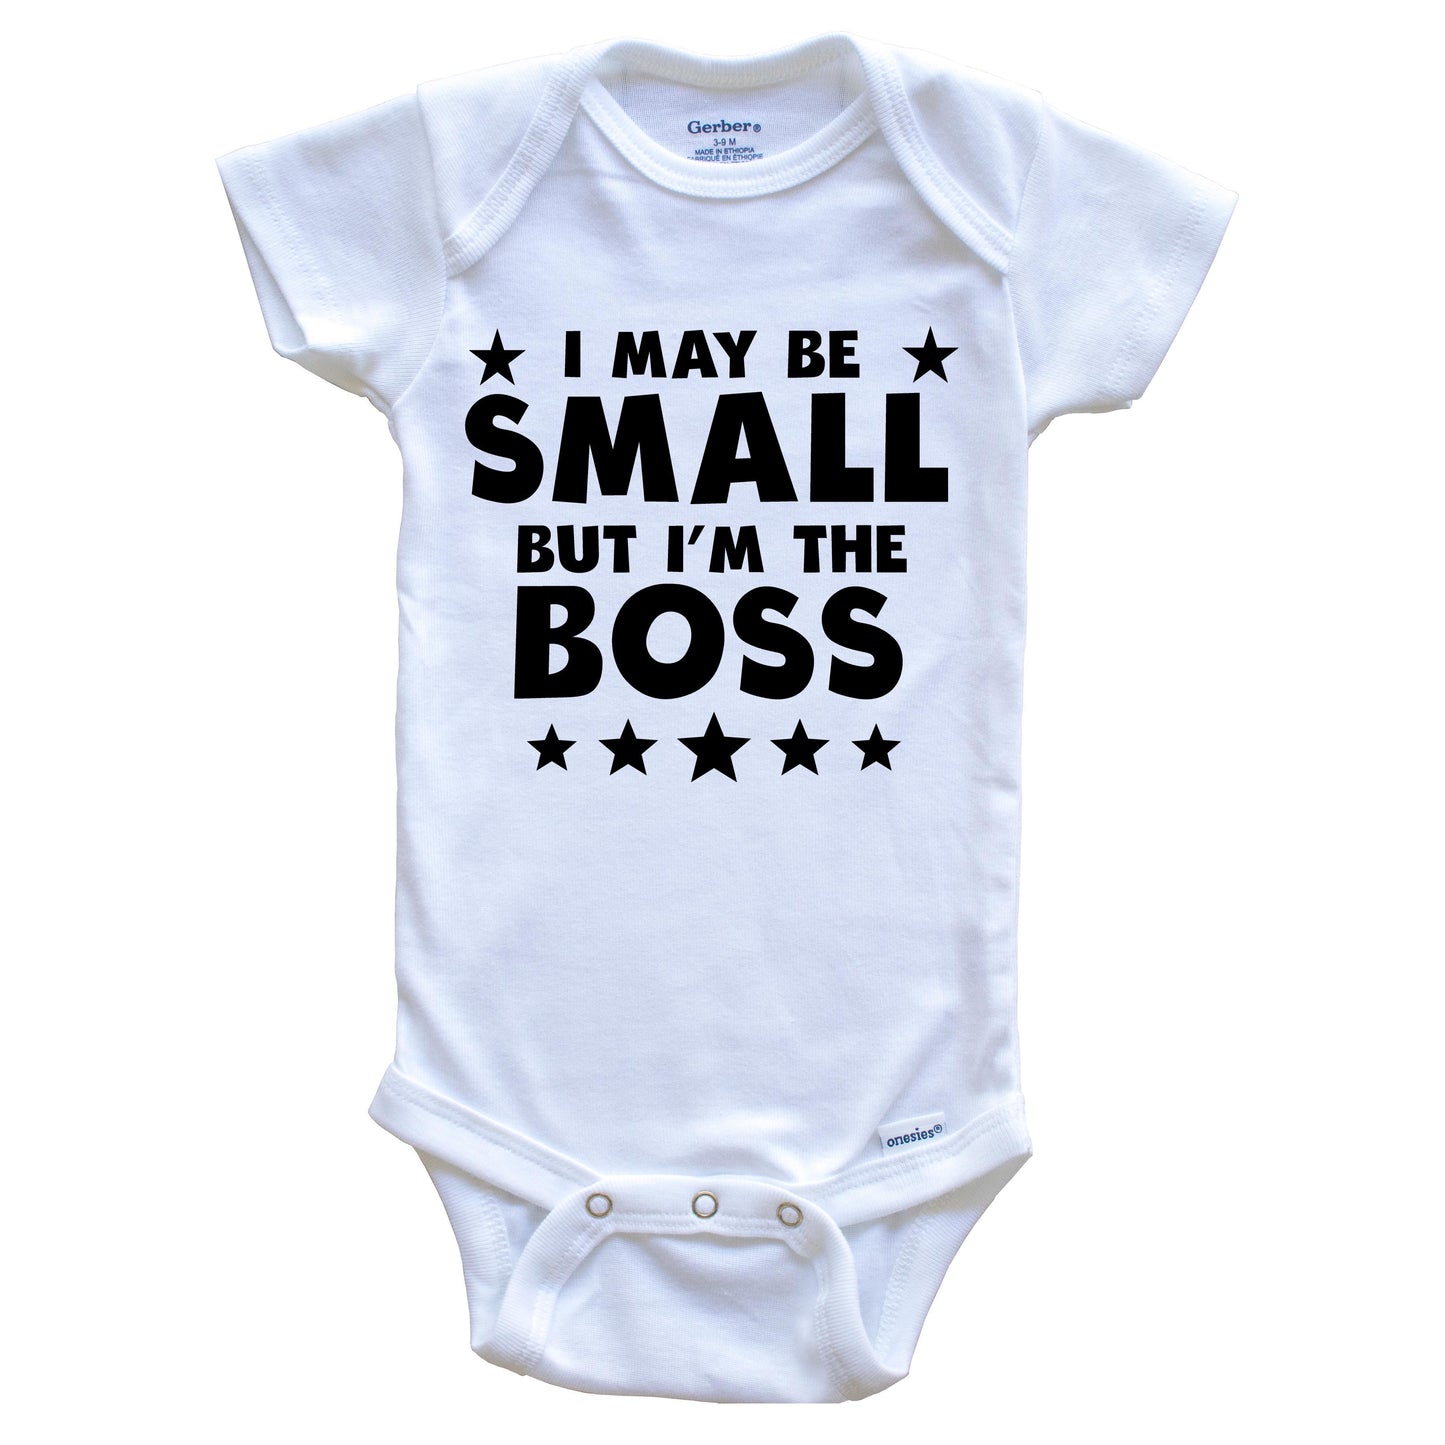 I May Be Small But I'm The Boss Funny Baby Onesie